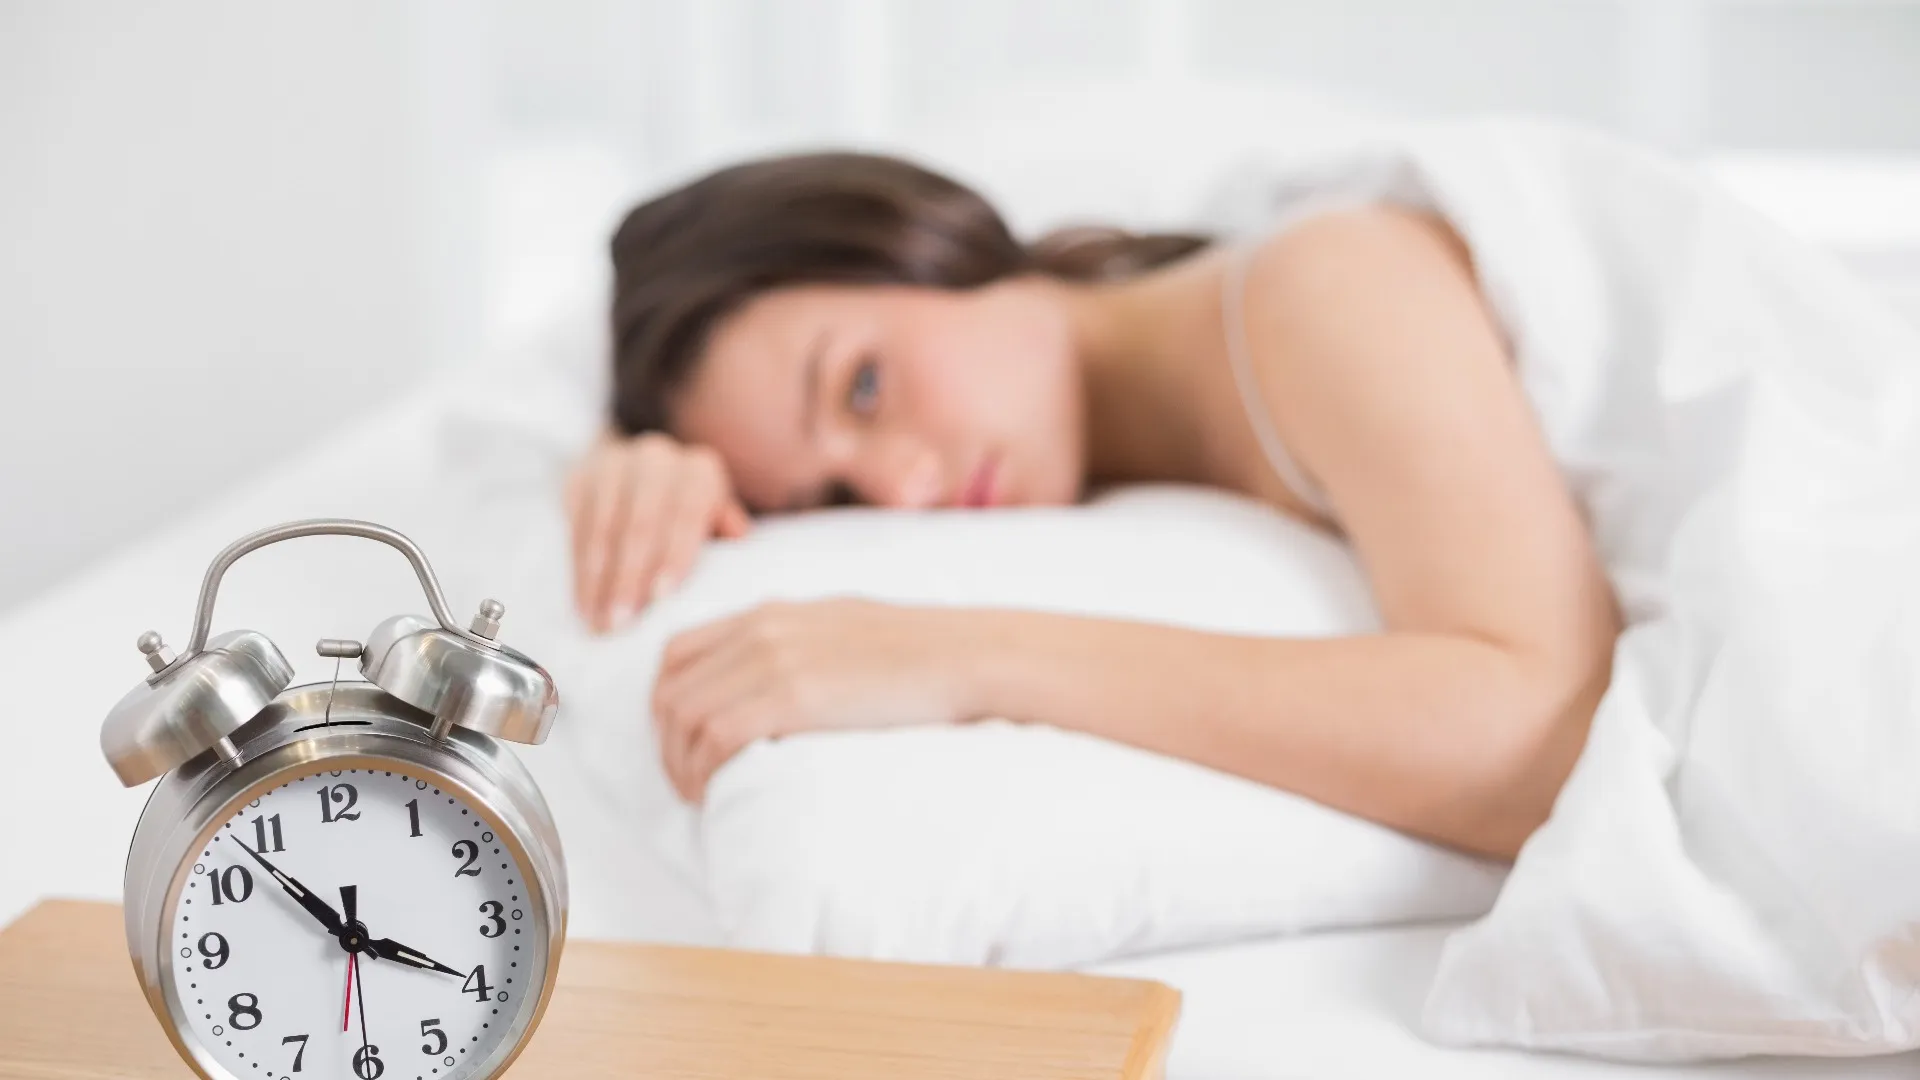 Causes of Insomnia: When Melatonin Supplements Aren’t Nearly Enough